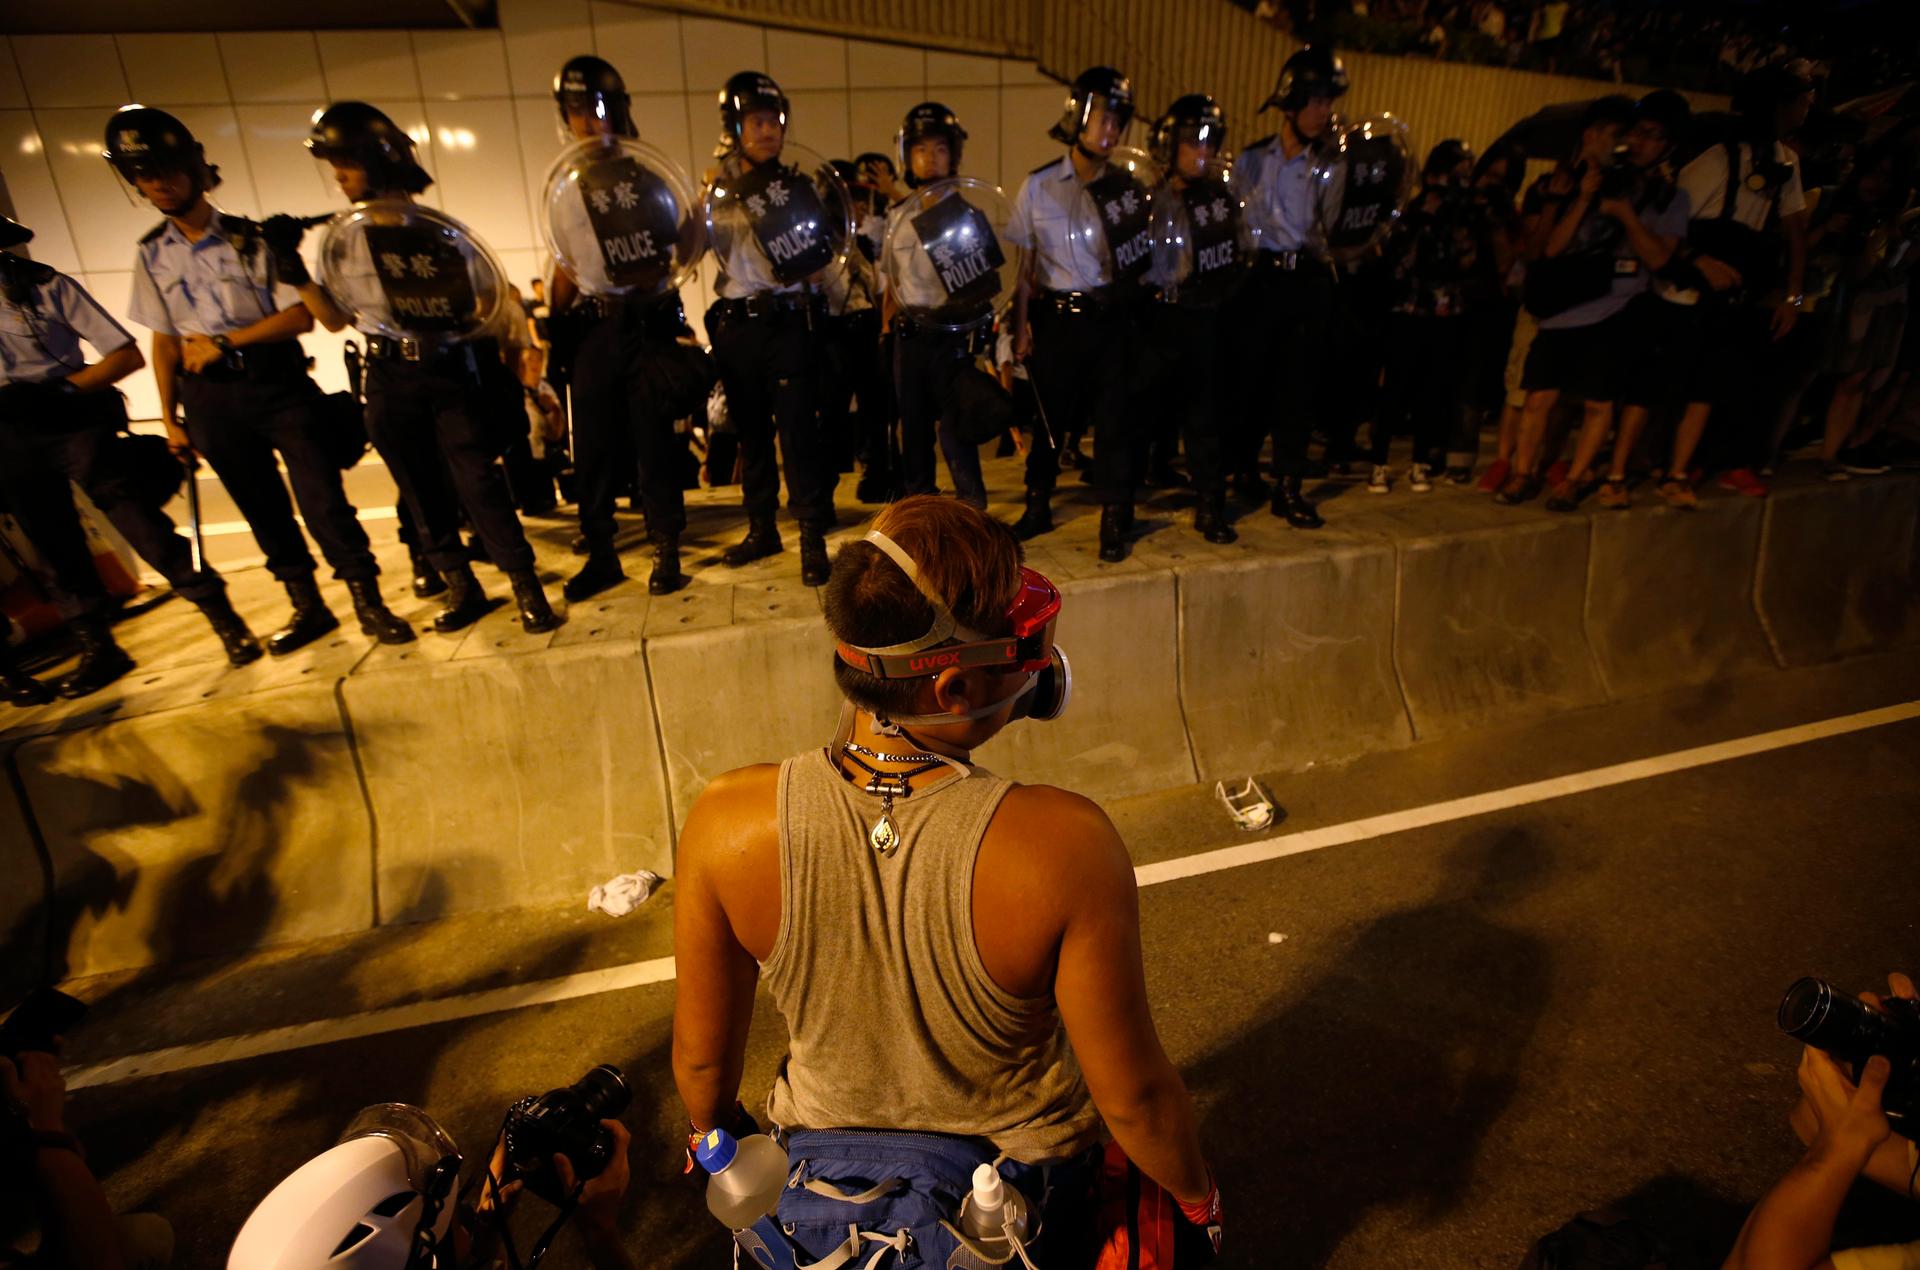 A pro-democracy protester faces a police cordon as demonstrators continue to block an area outside of the government headquarters building in Hong Kong.